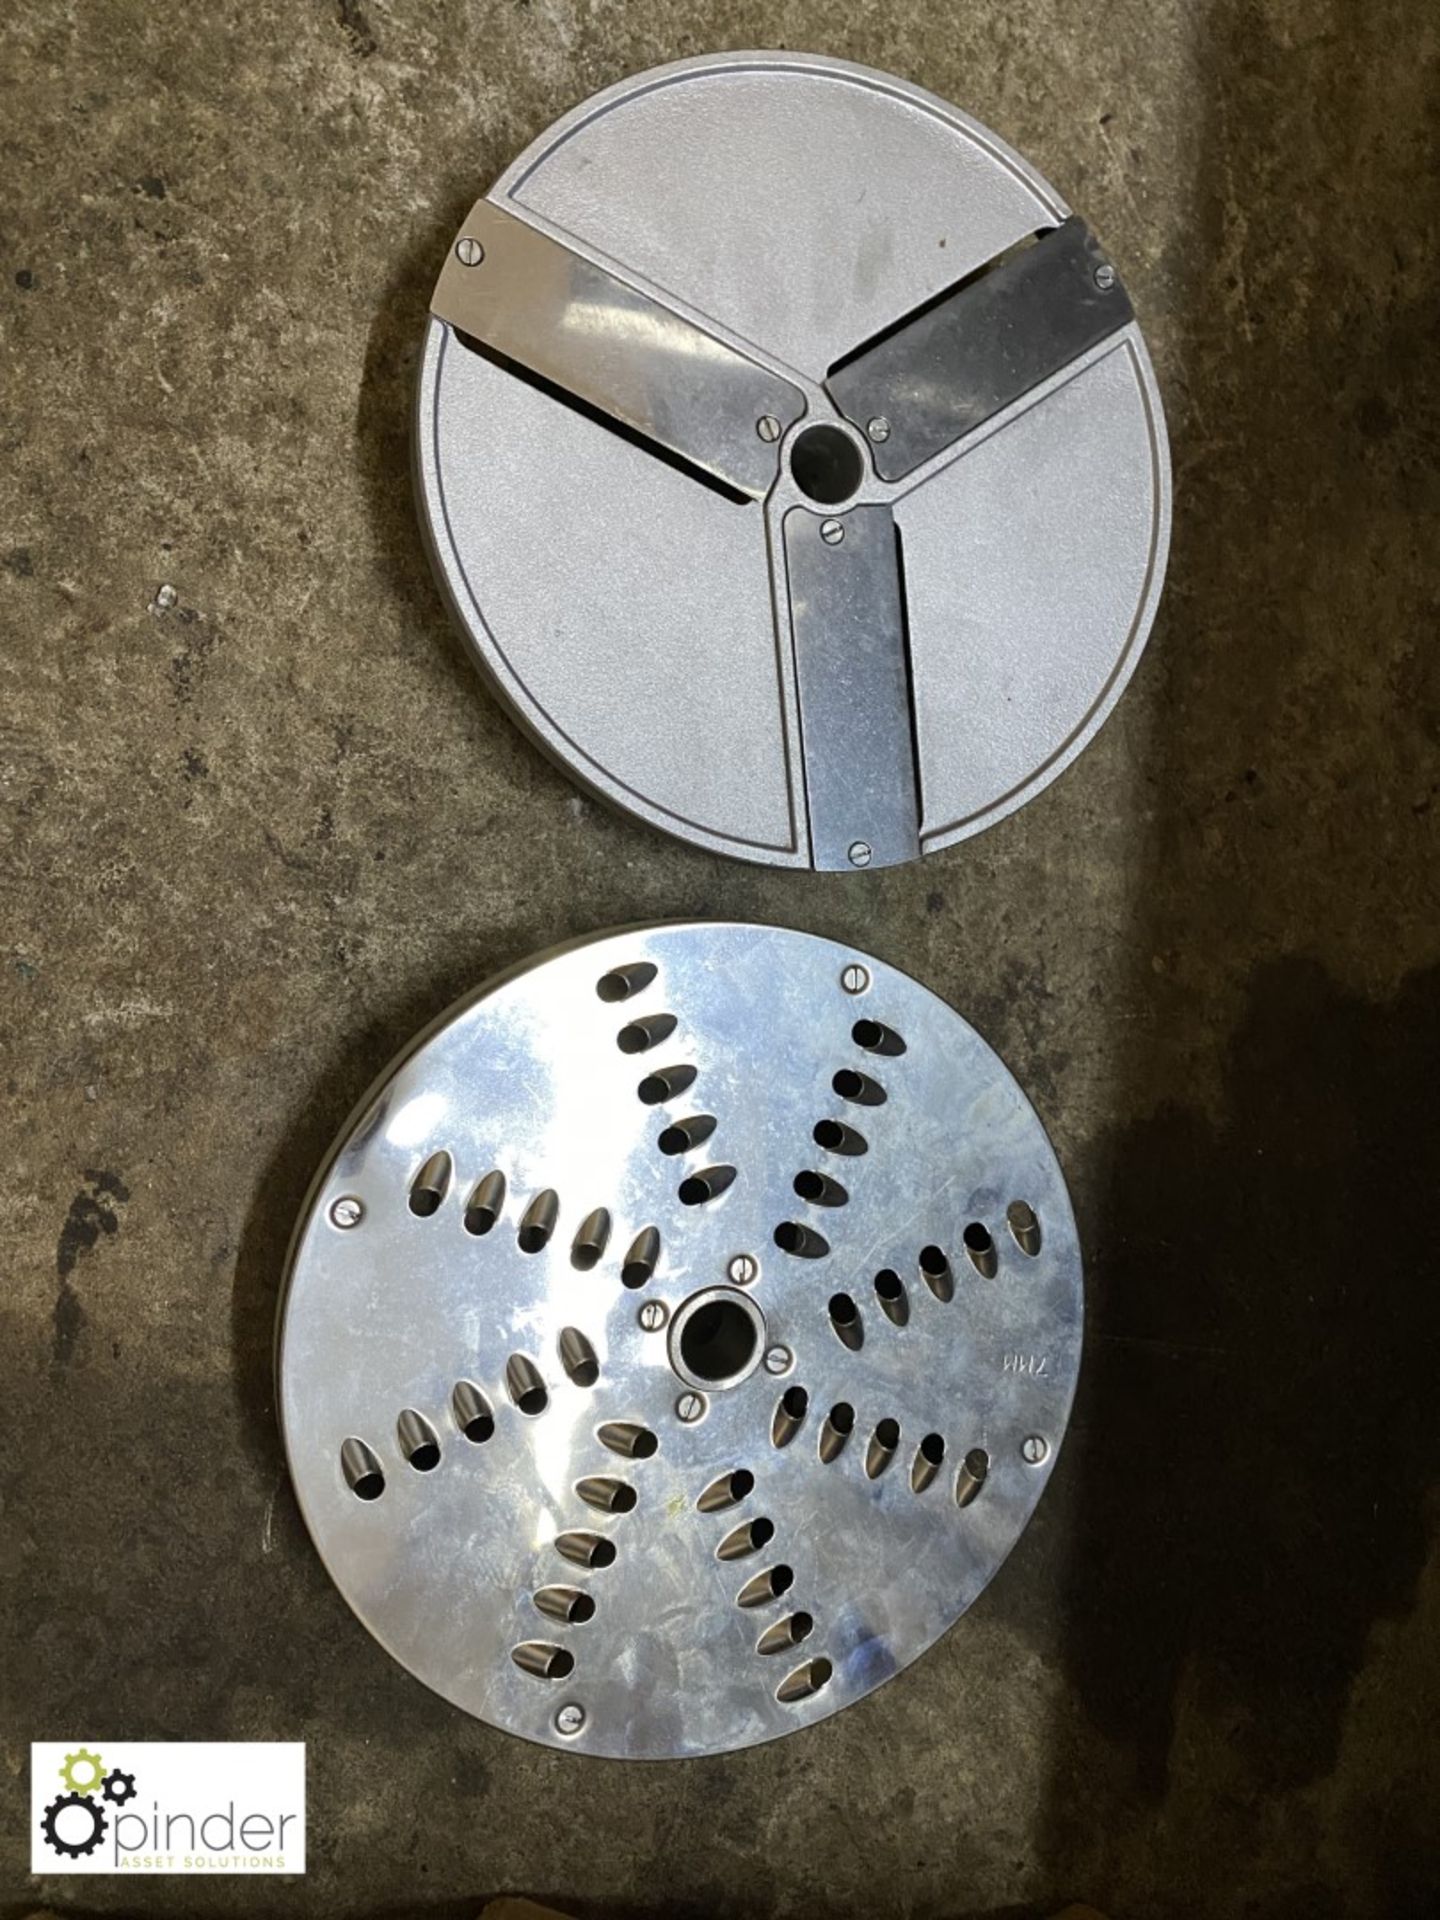 2 Grating Plates, 12mm and 7mm, and Slicing Plate, 3mm, boxed and unused